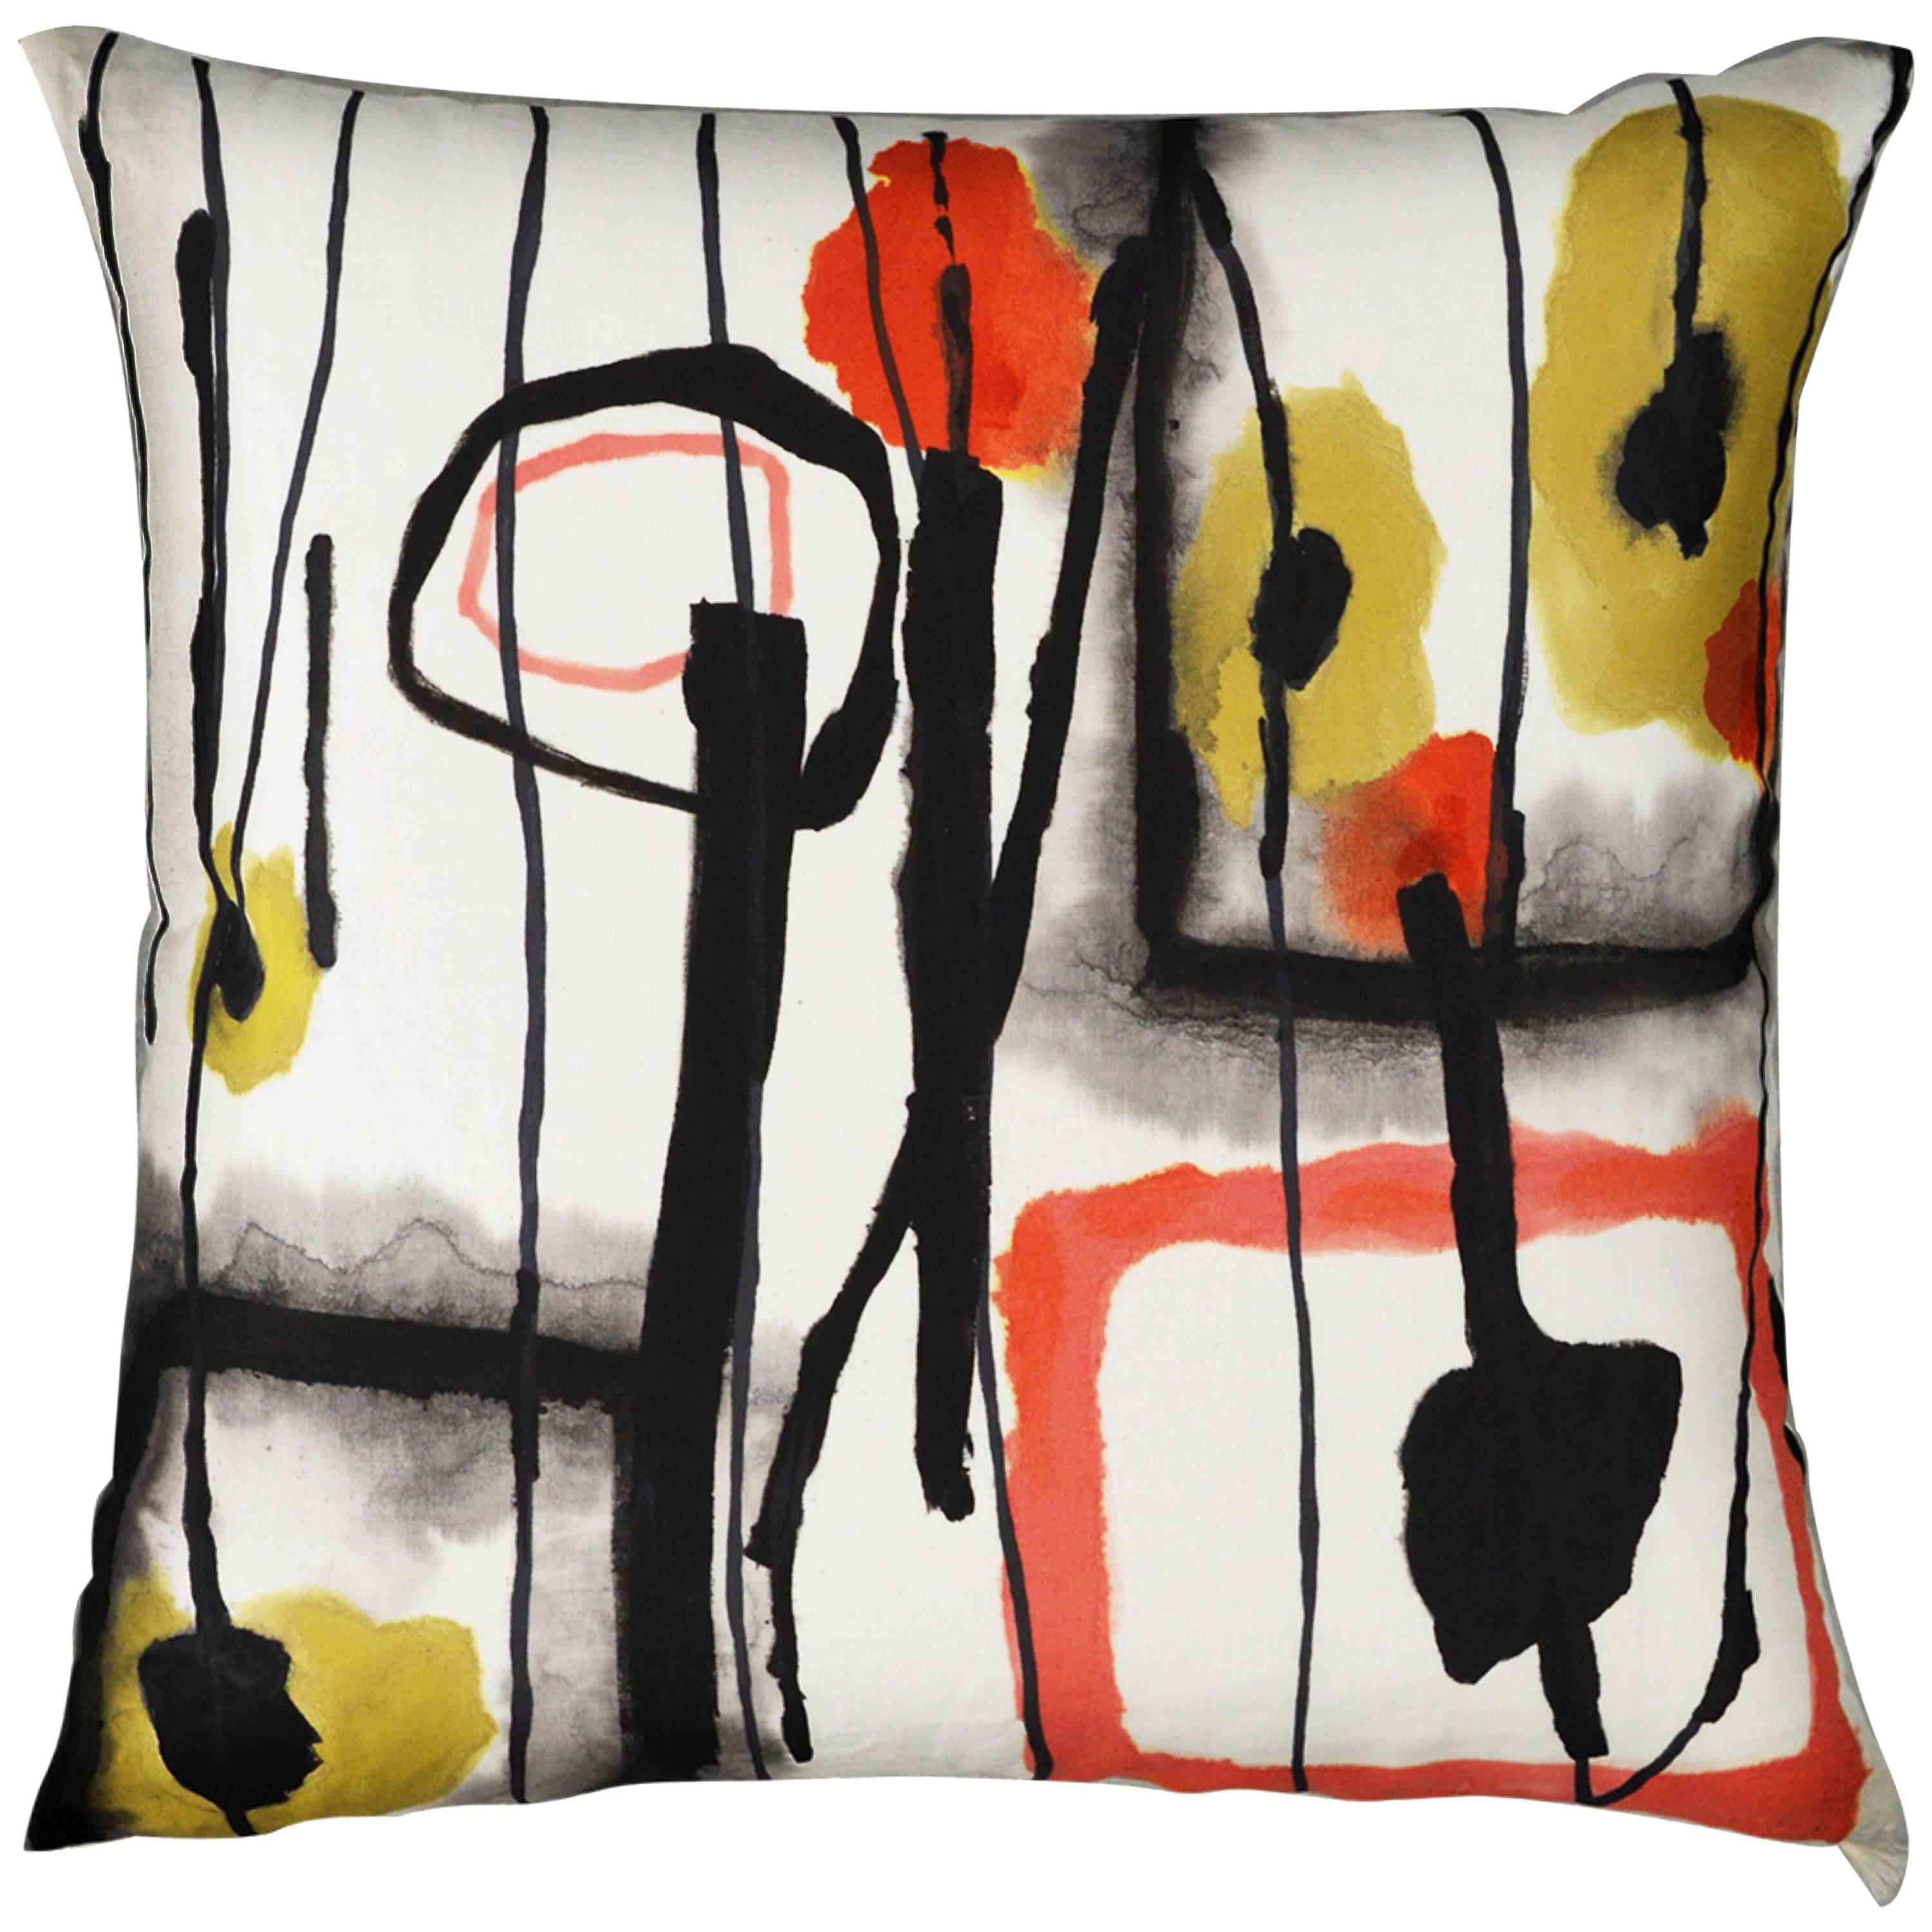 AbEx, Contemporary One-of-a-Kind Abstract Expressionist Handmade Linen Pillow